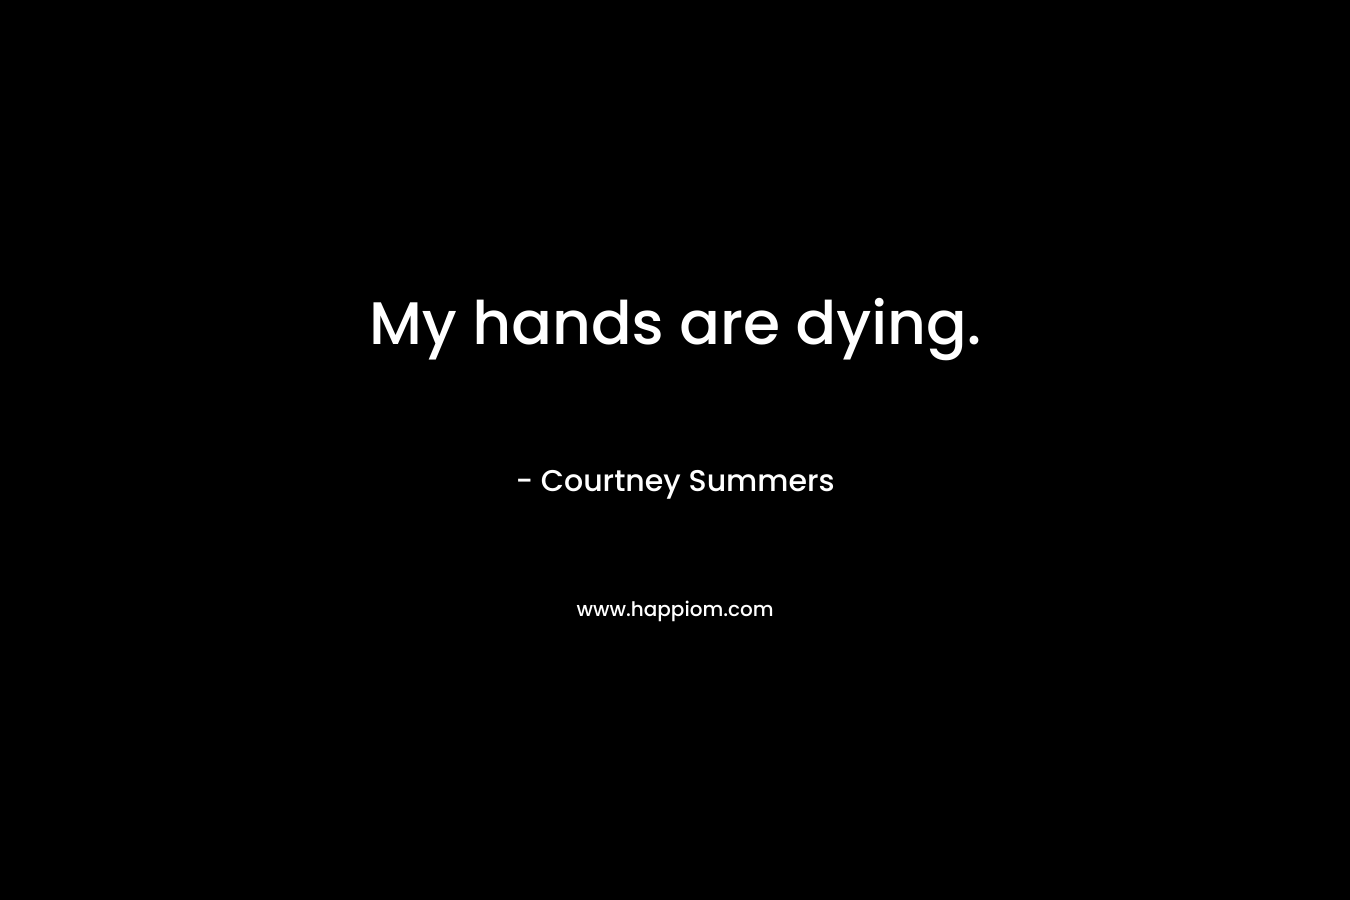 My hands are dying. – Courtney Summers